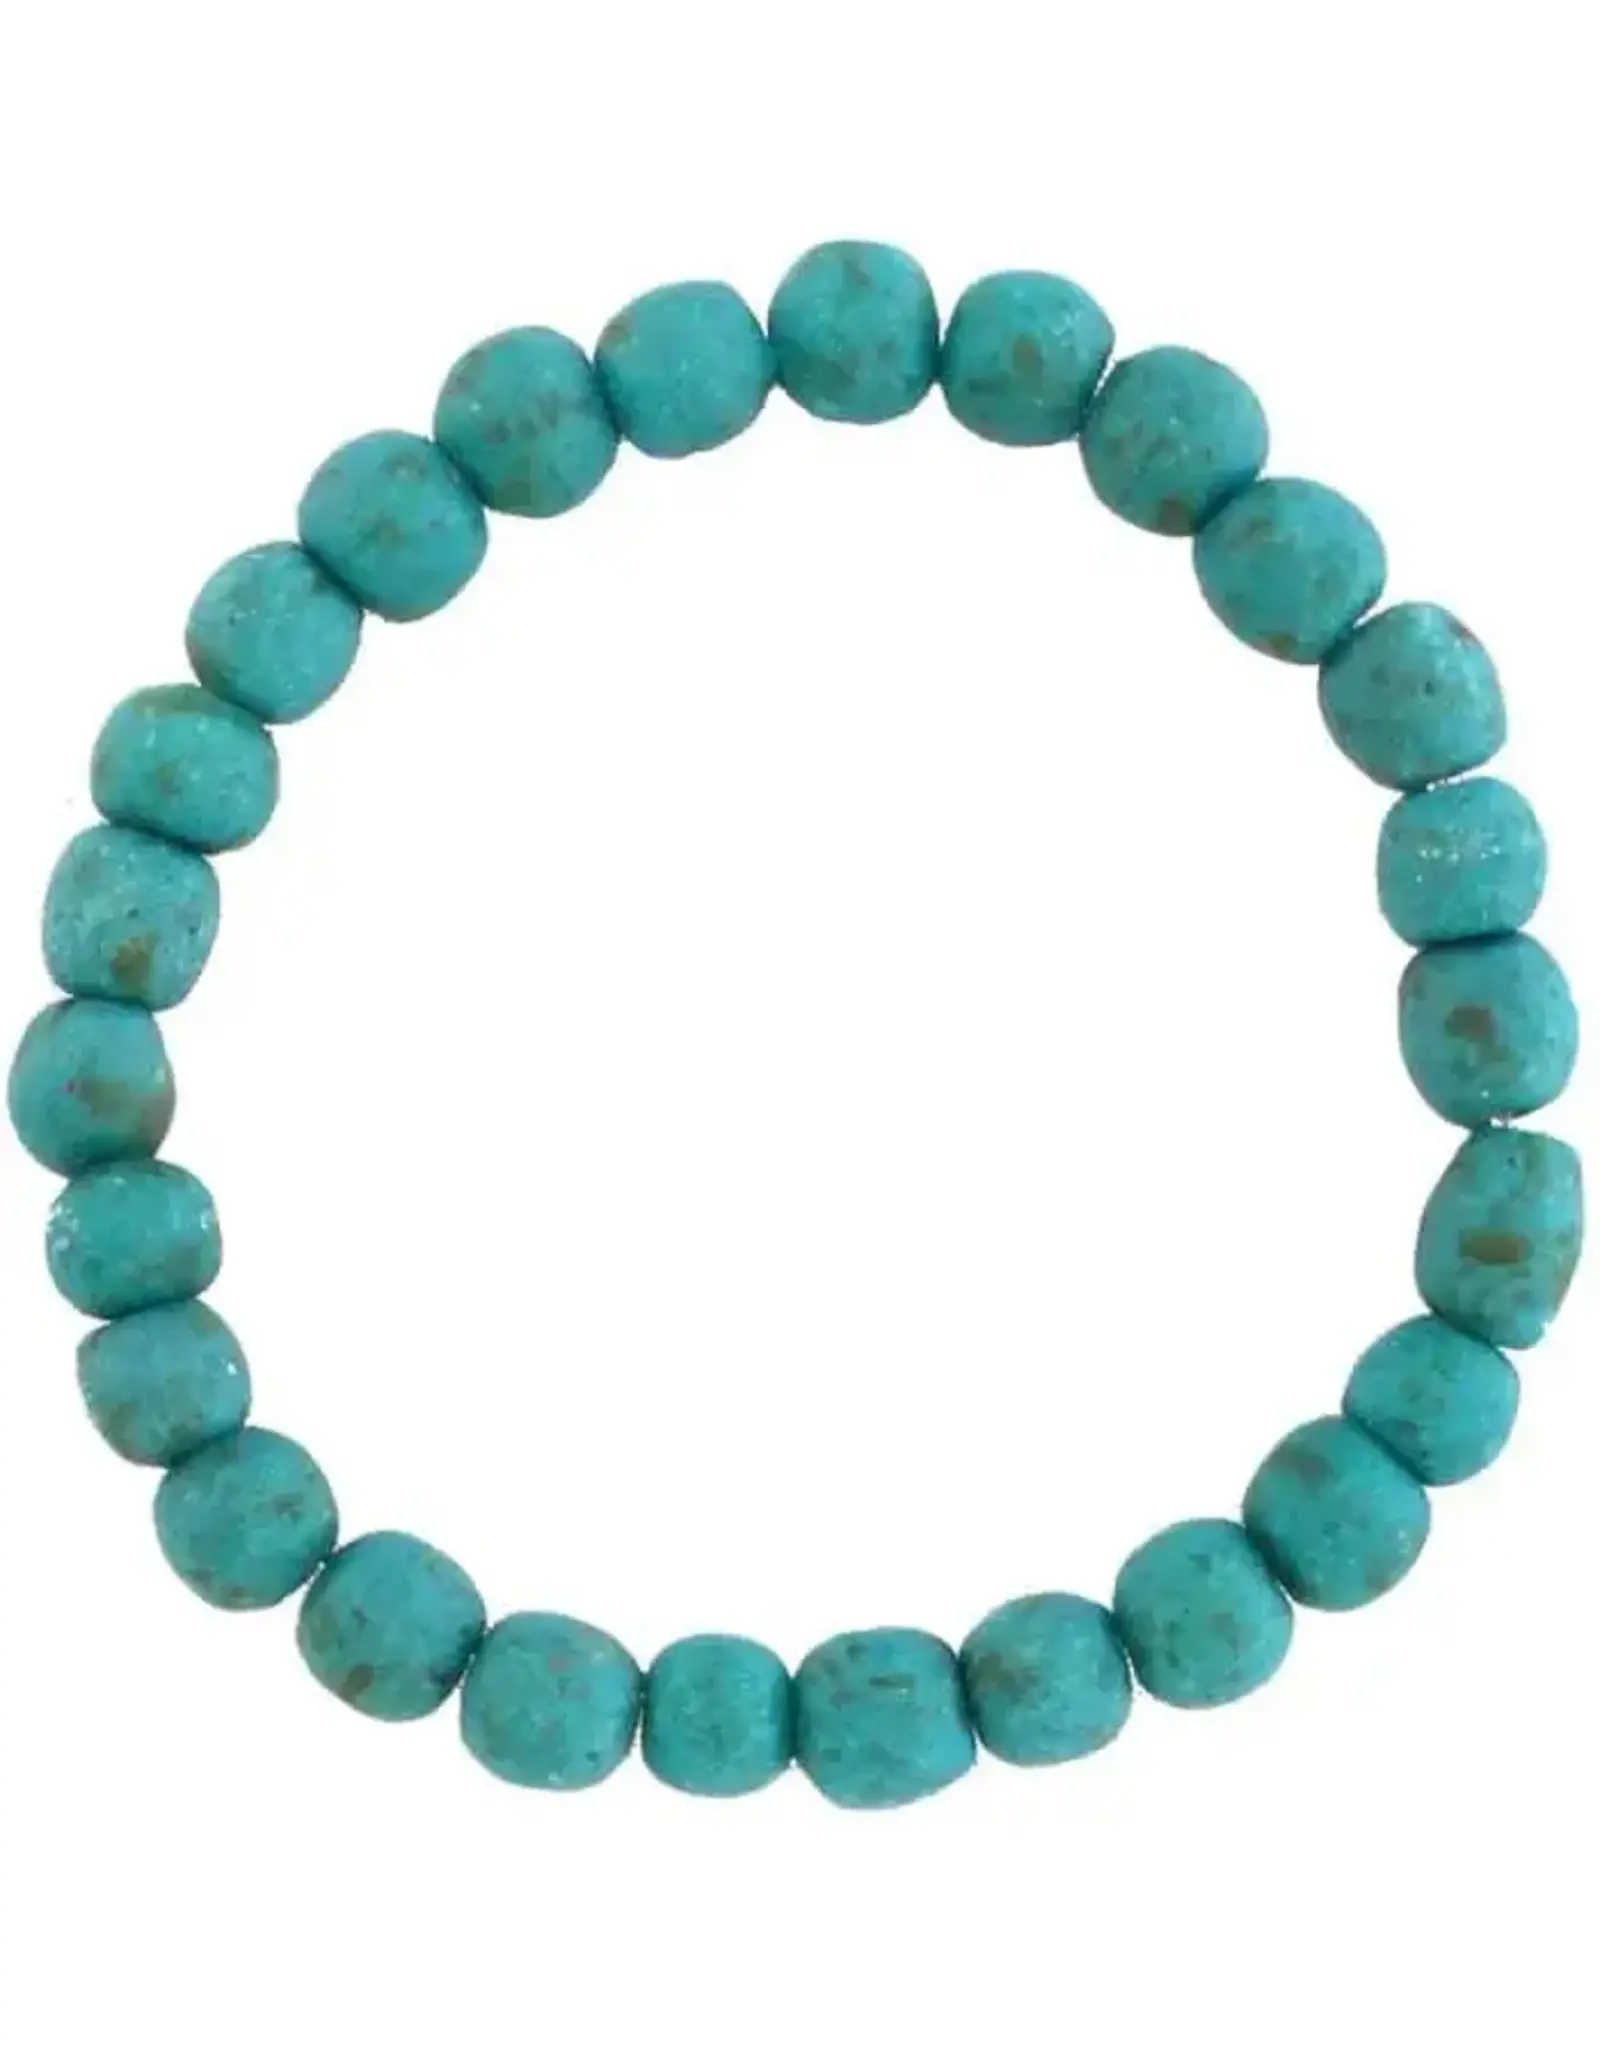 Global Mamas Teal Recycled Glass Bracelet